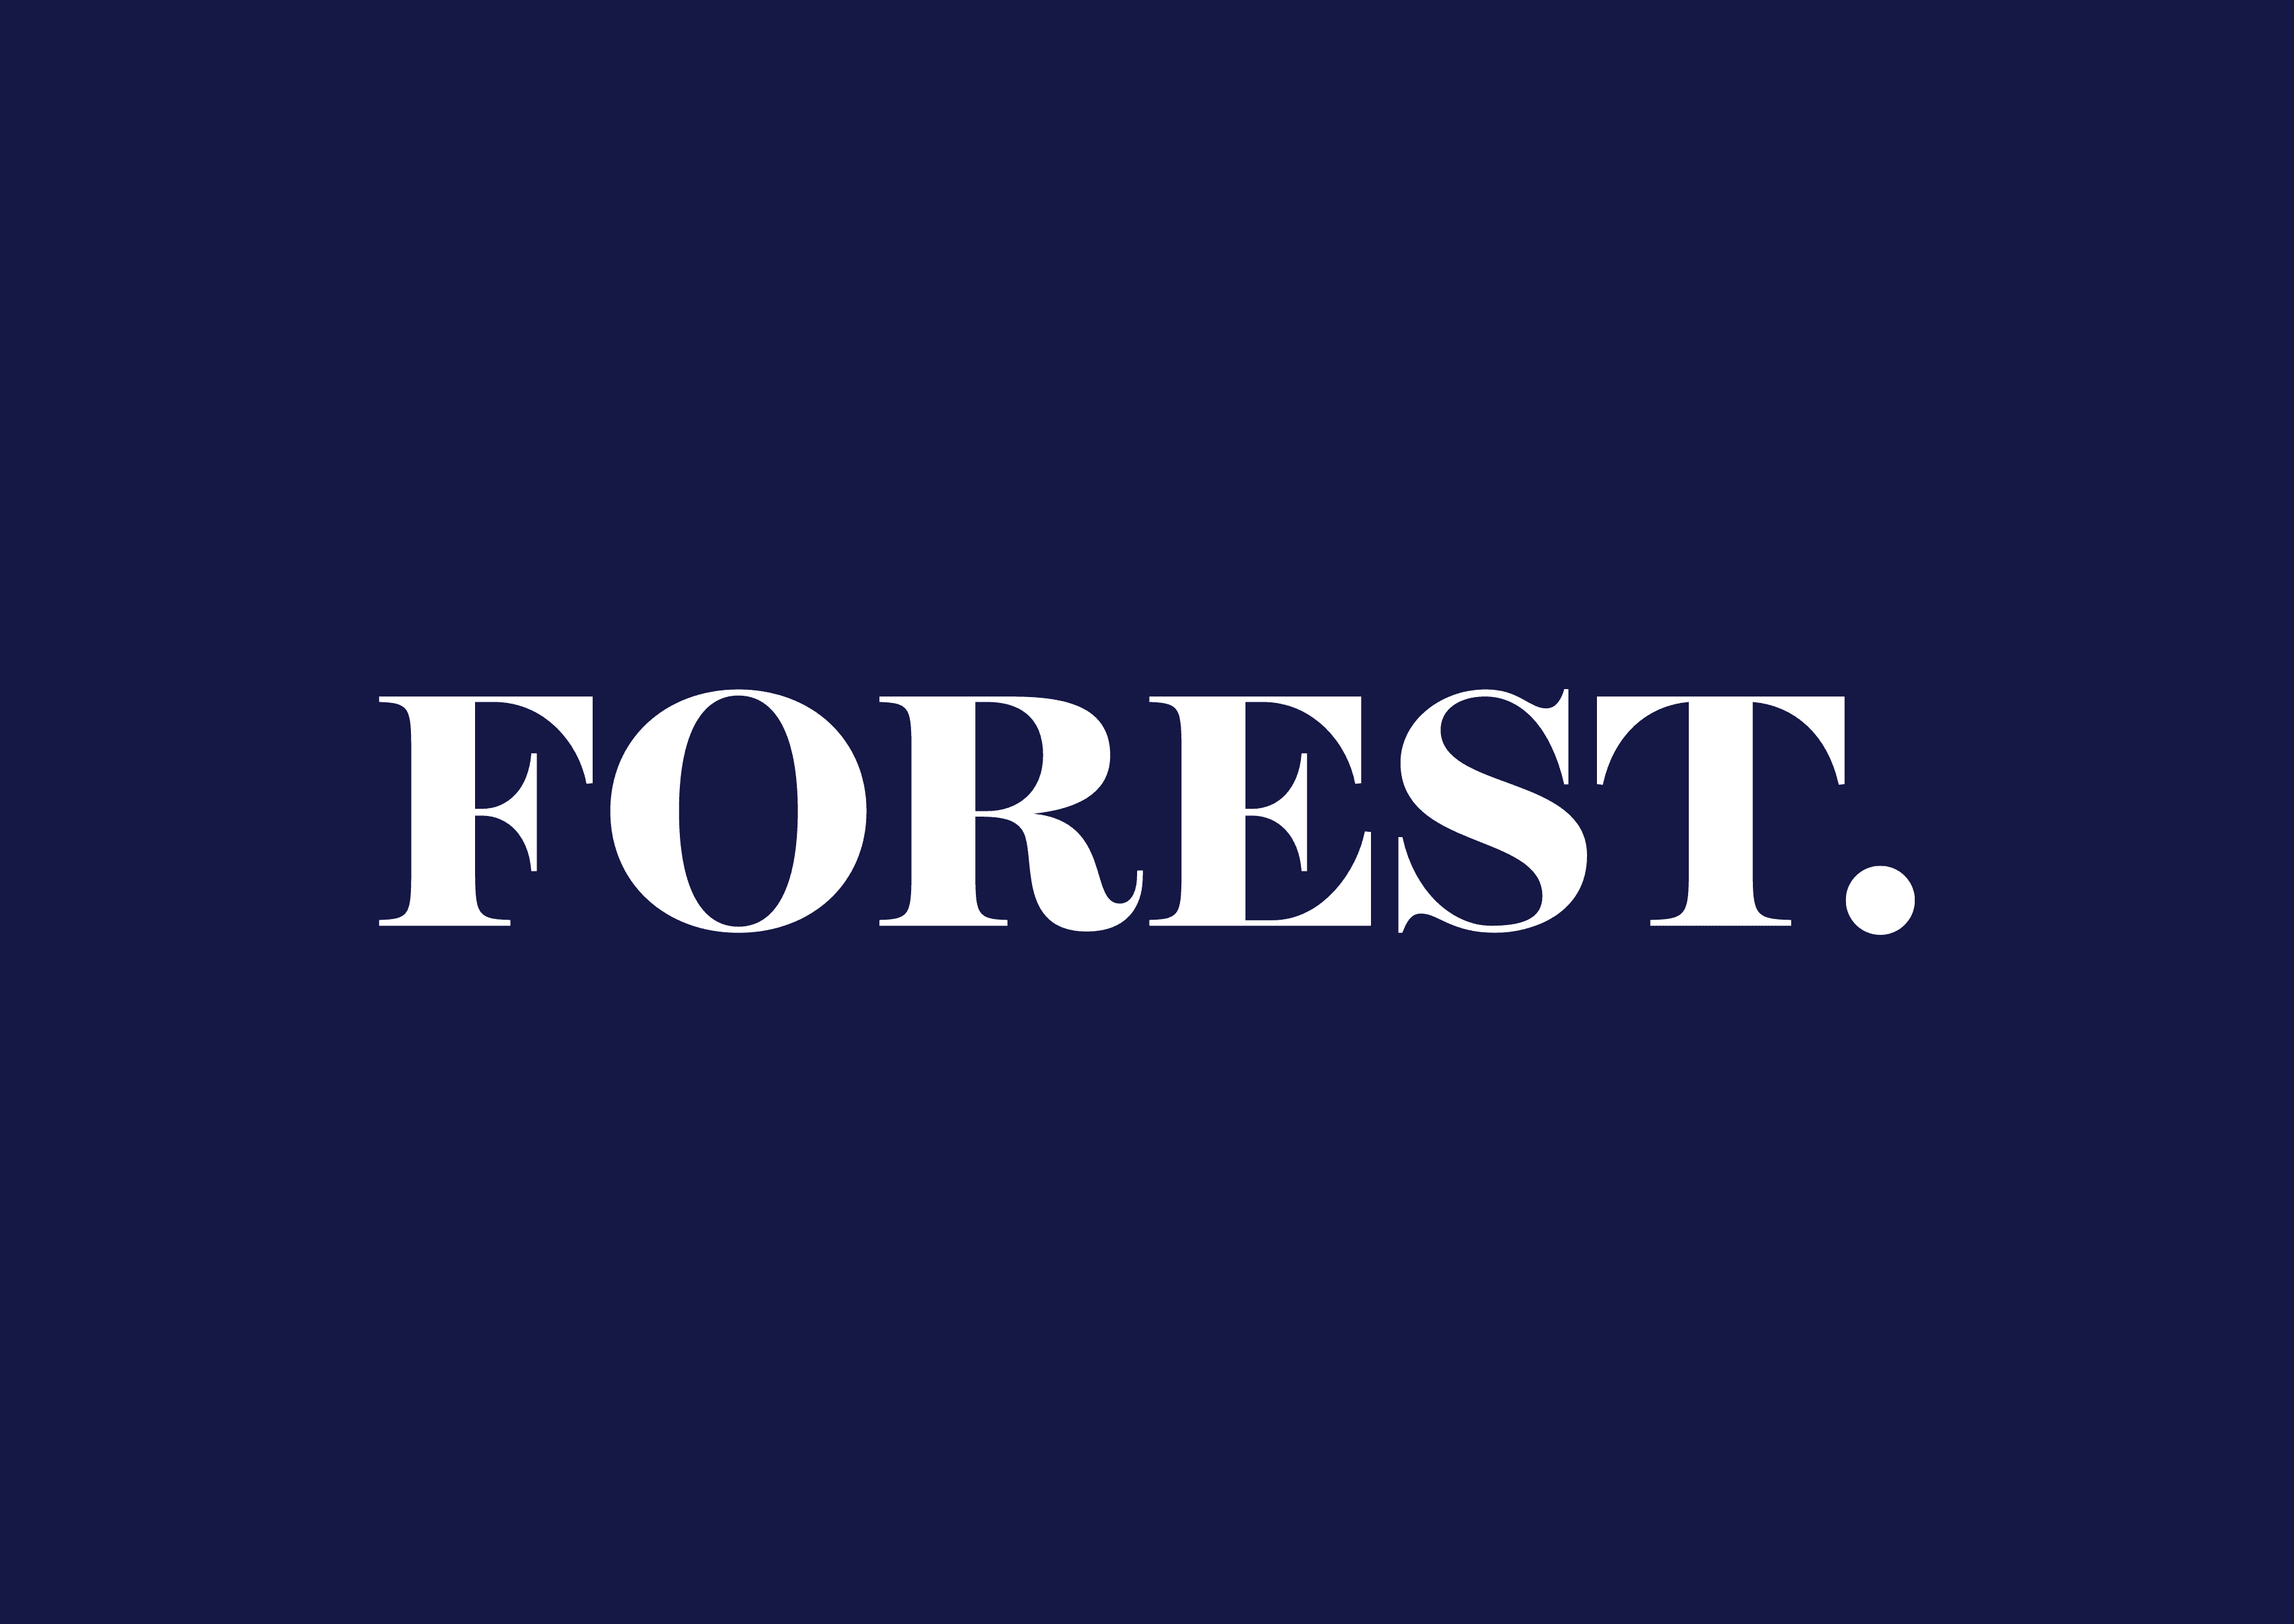 Product Innovative Insurance Solutions | FOREST. image